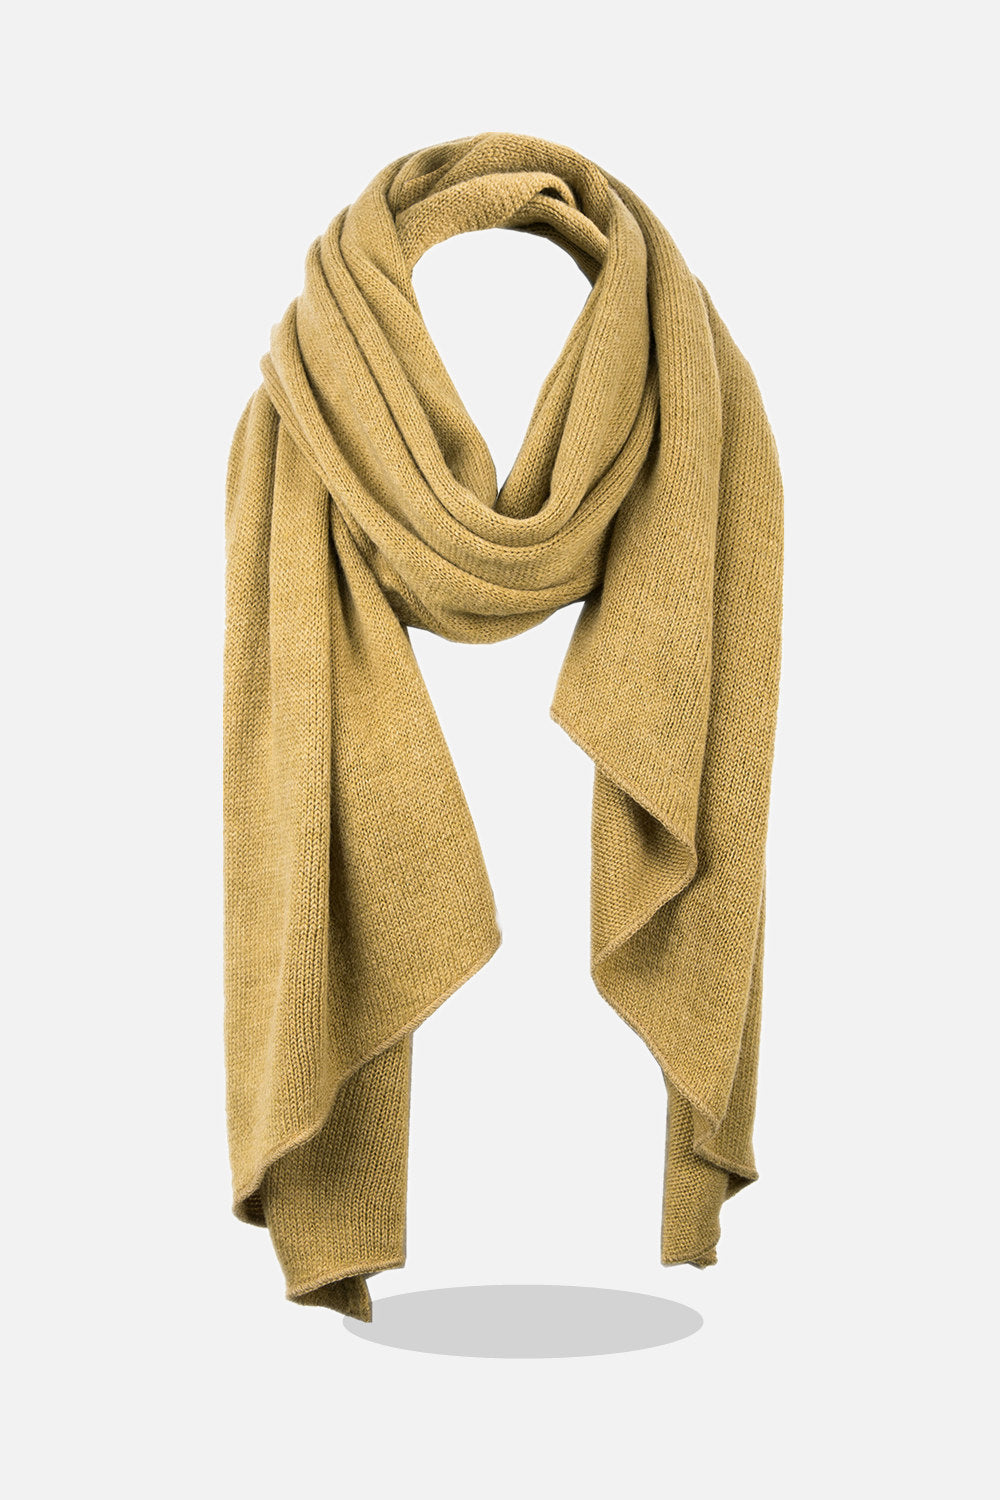 Thick Natural Brown Cashmere Scarves - Patasi Cashmere